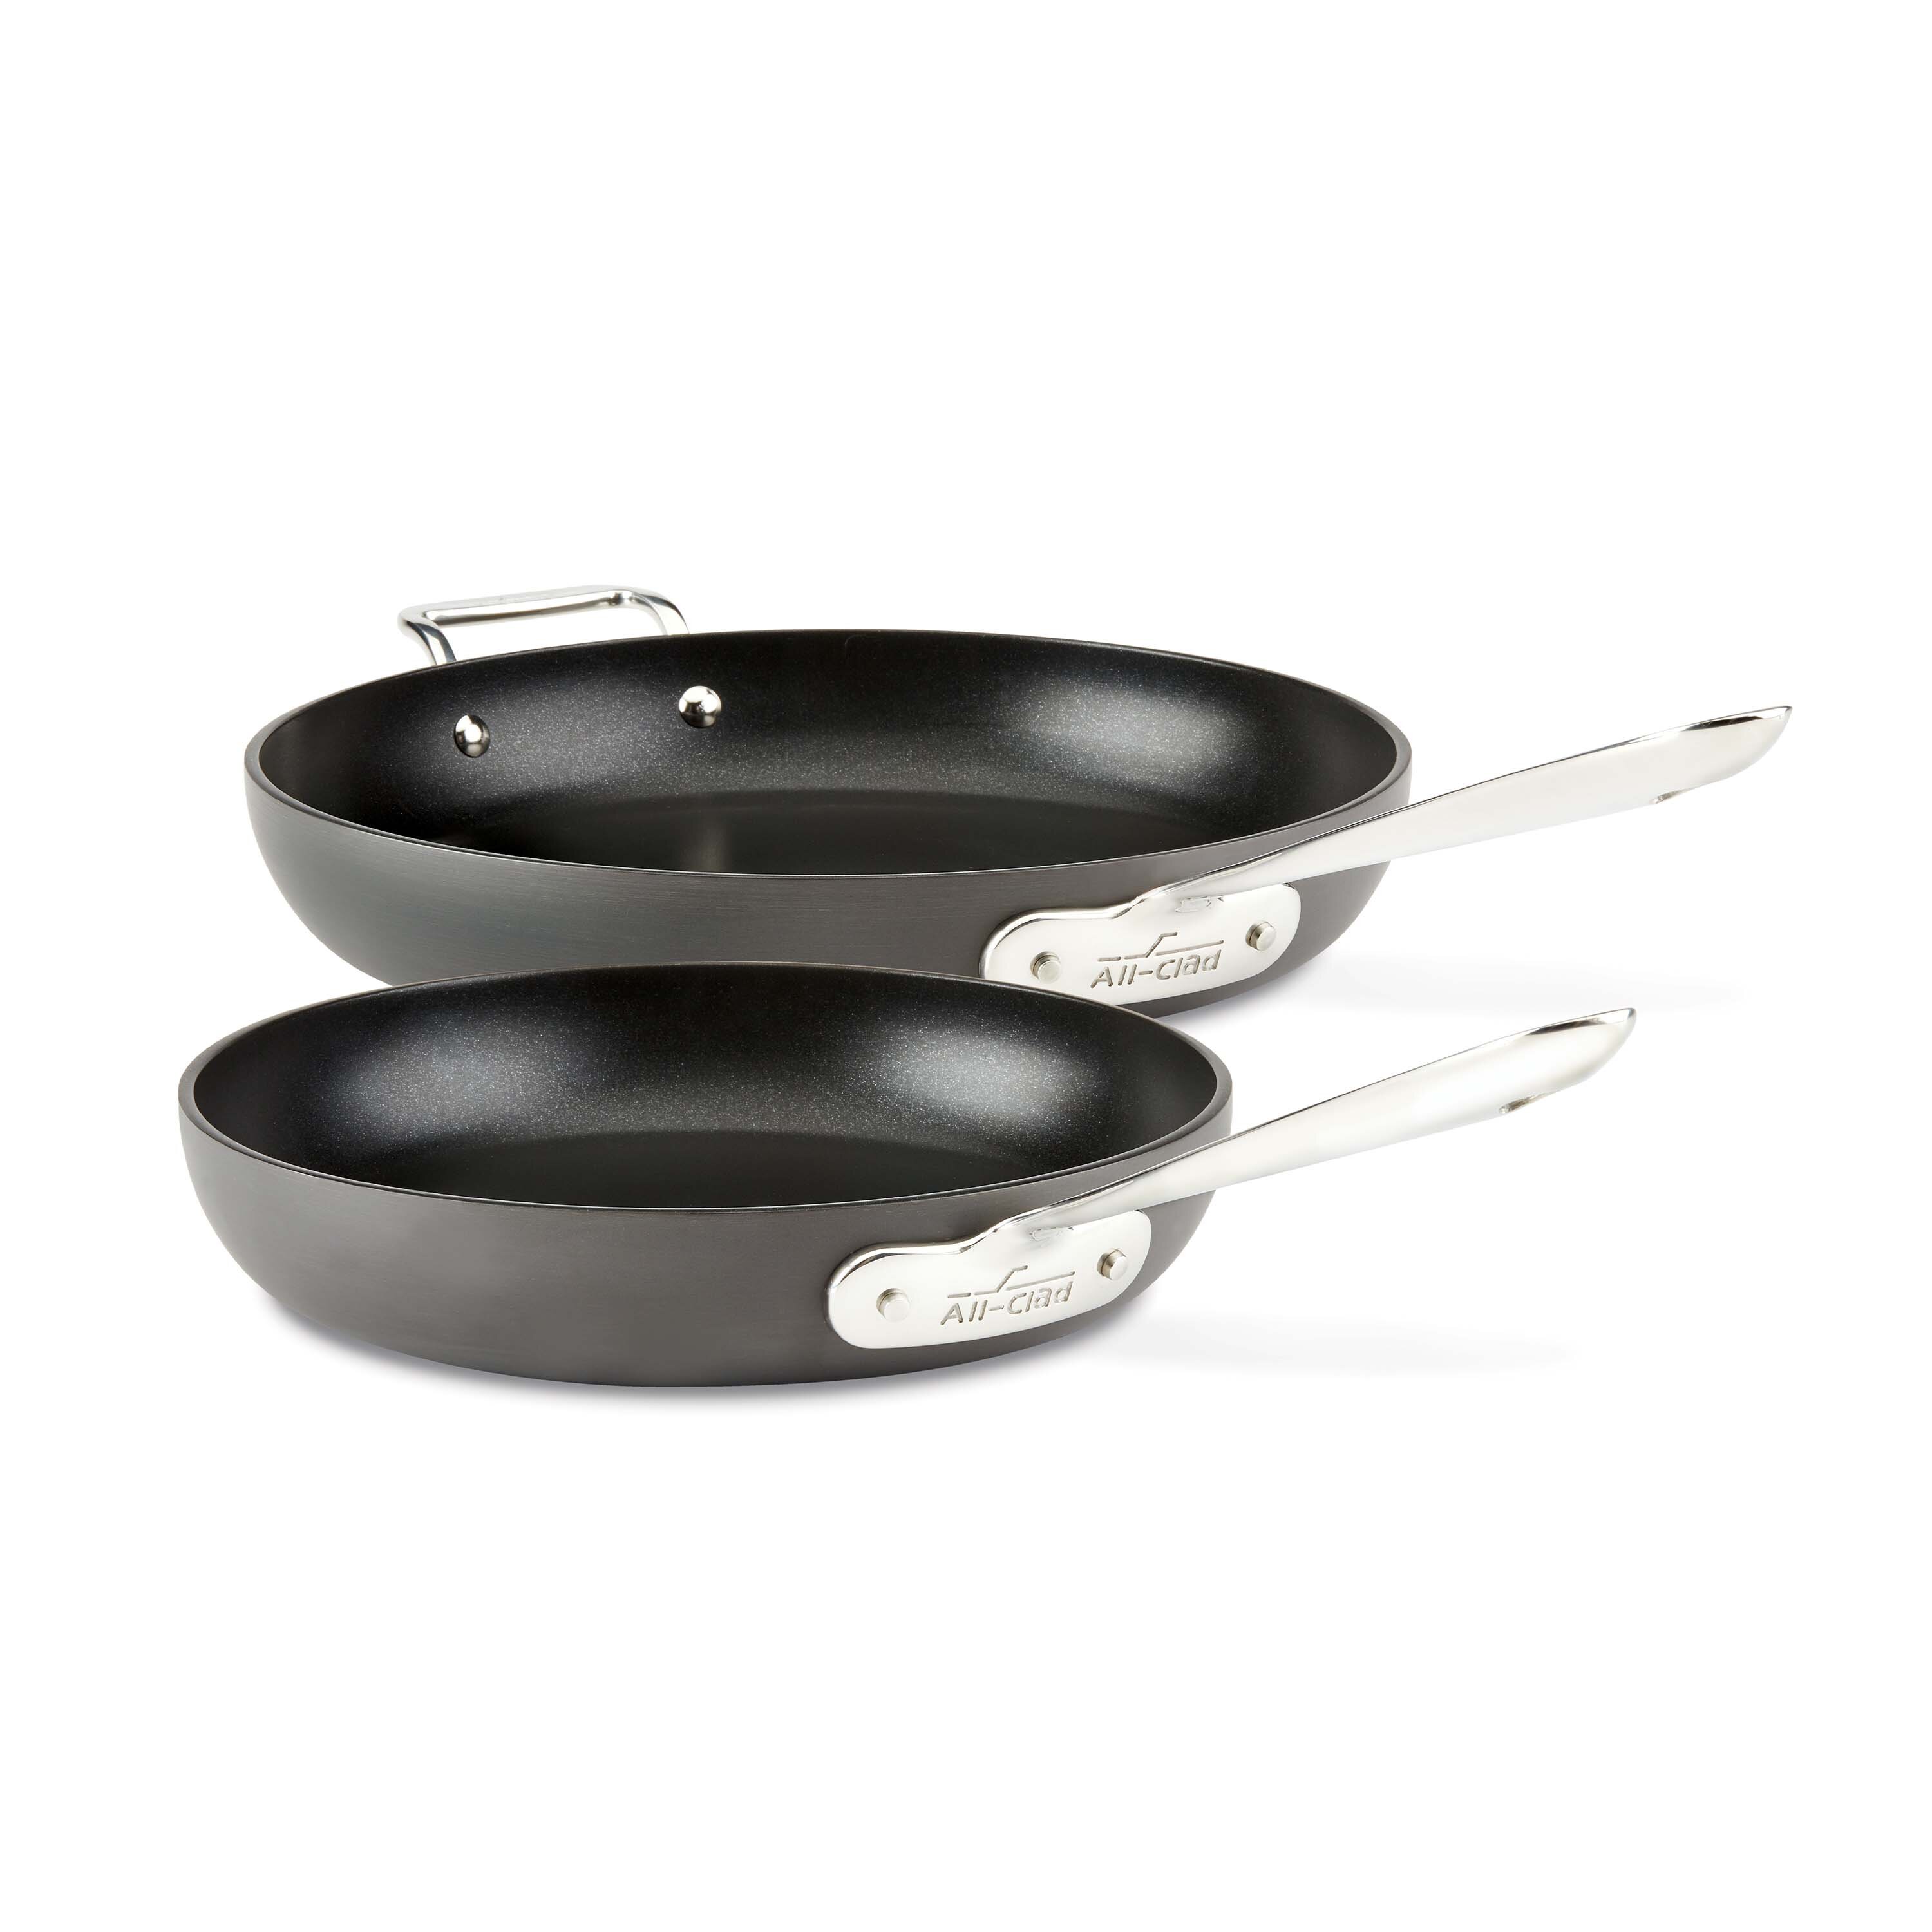 HA1 Anodized Nonstick Cookware, Stainless Steel Nonstick Pan